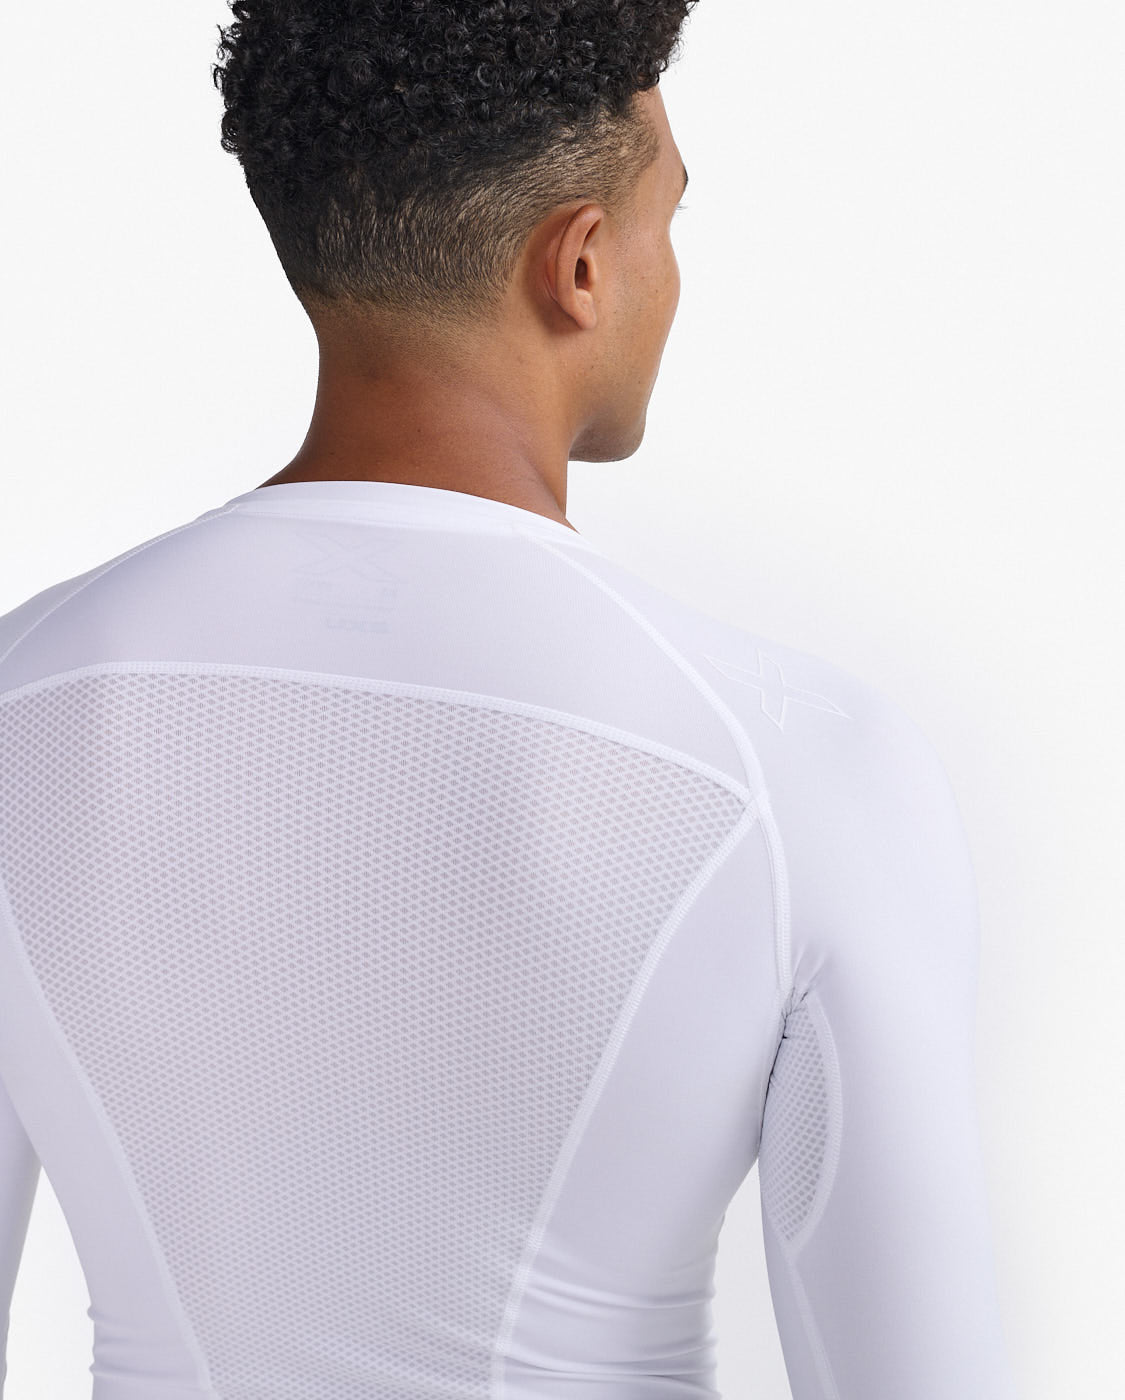 Core Compression Game Day Long Sleeve – 2XU